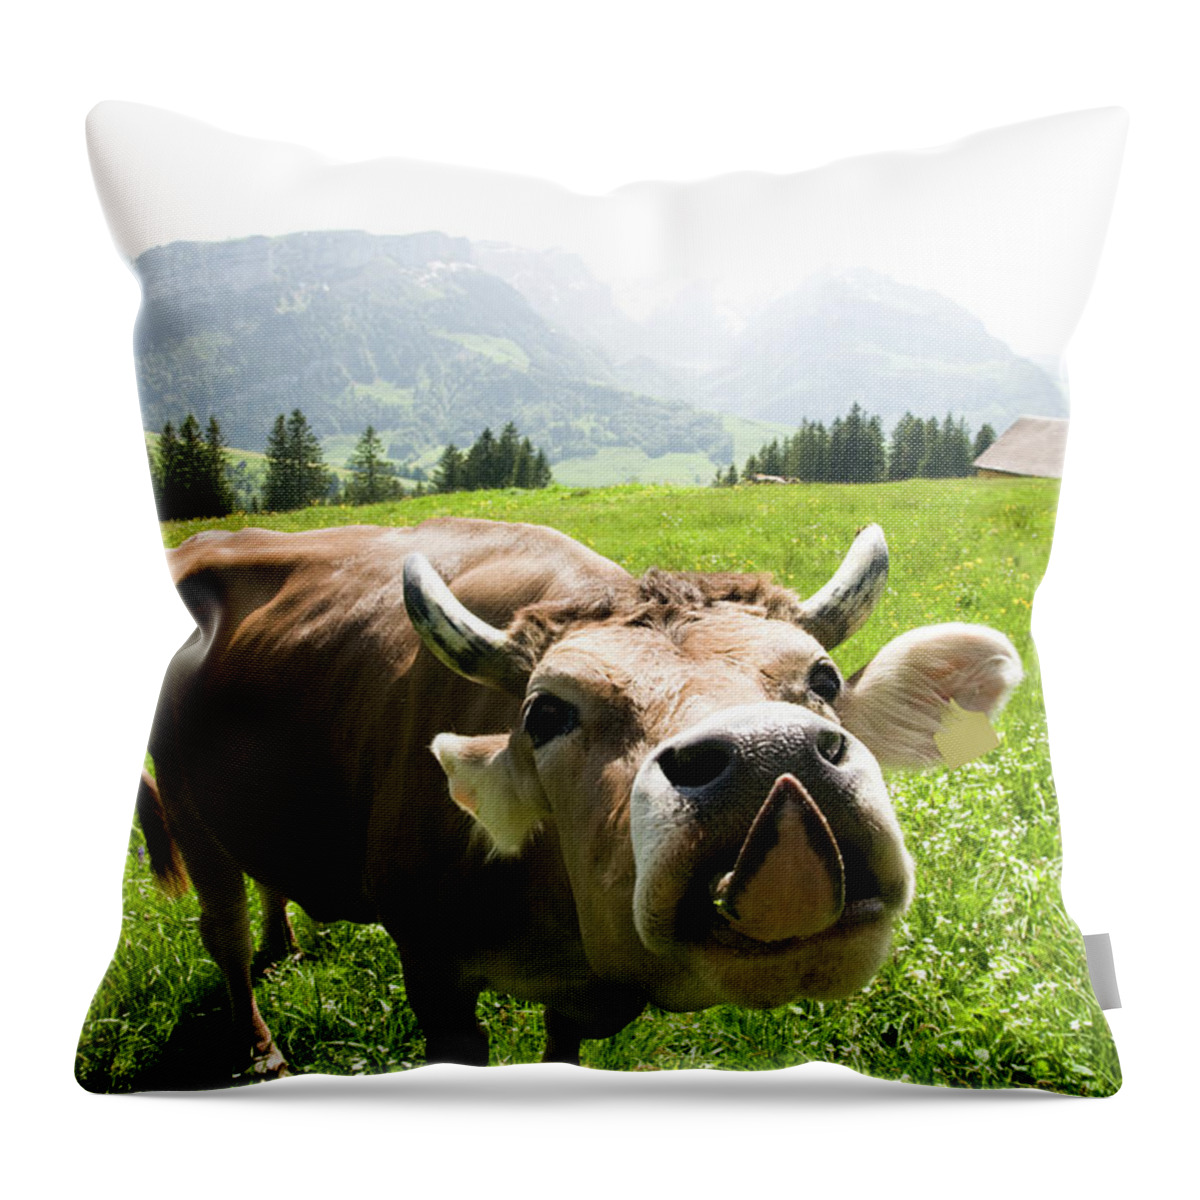 Horned Throw Pillow featuring the photograph Cow Sticking Out Tongue by Assalve